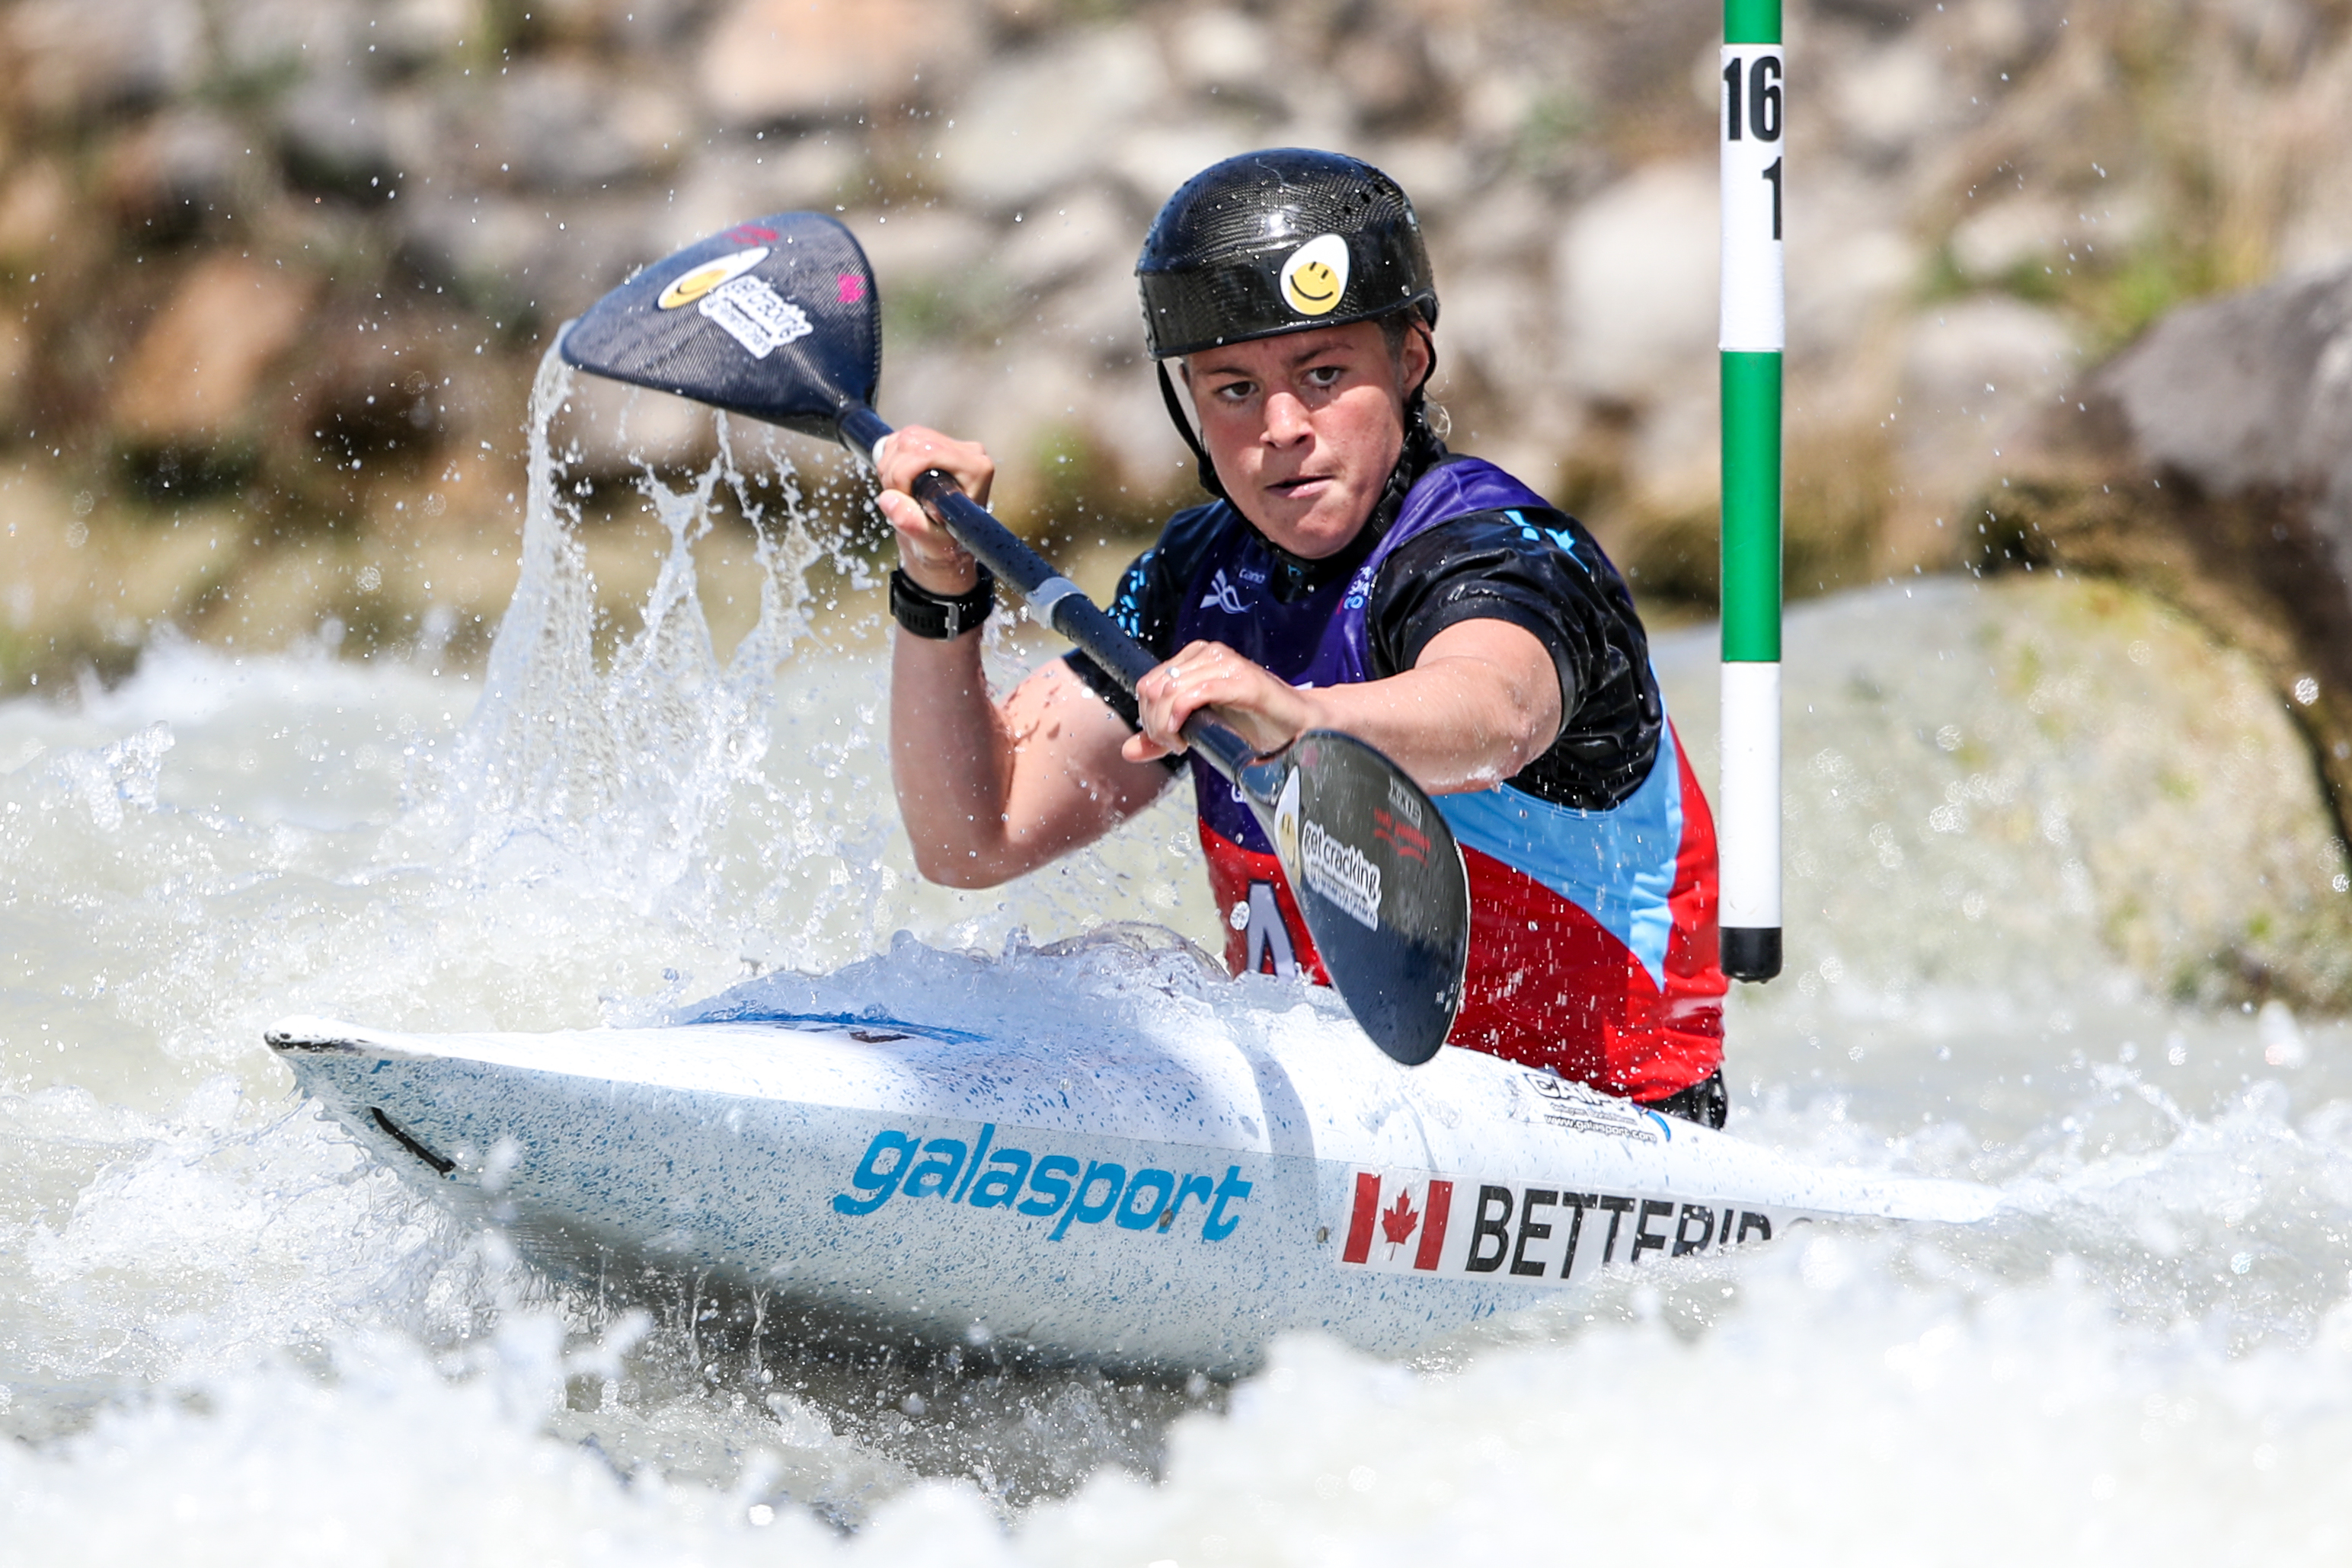 Slalom Paddlers Competing at the Olympic Venue Canoe ...